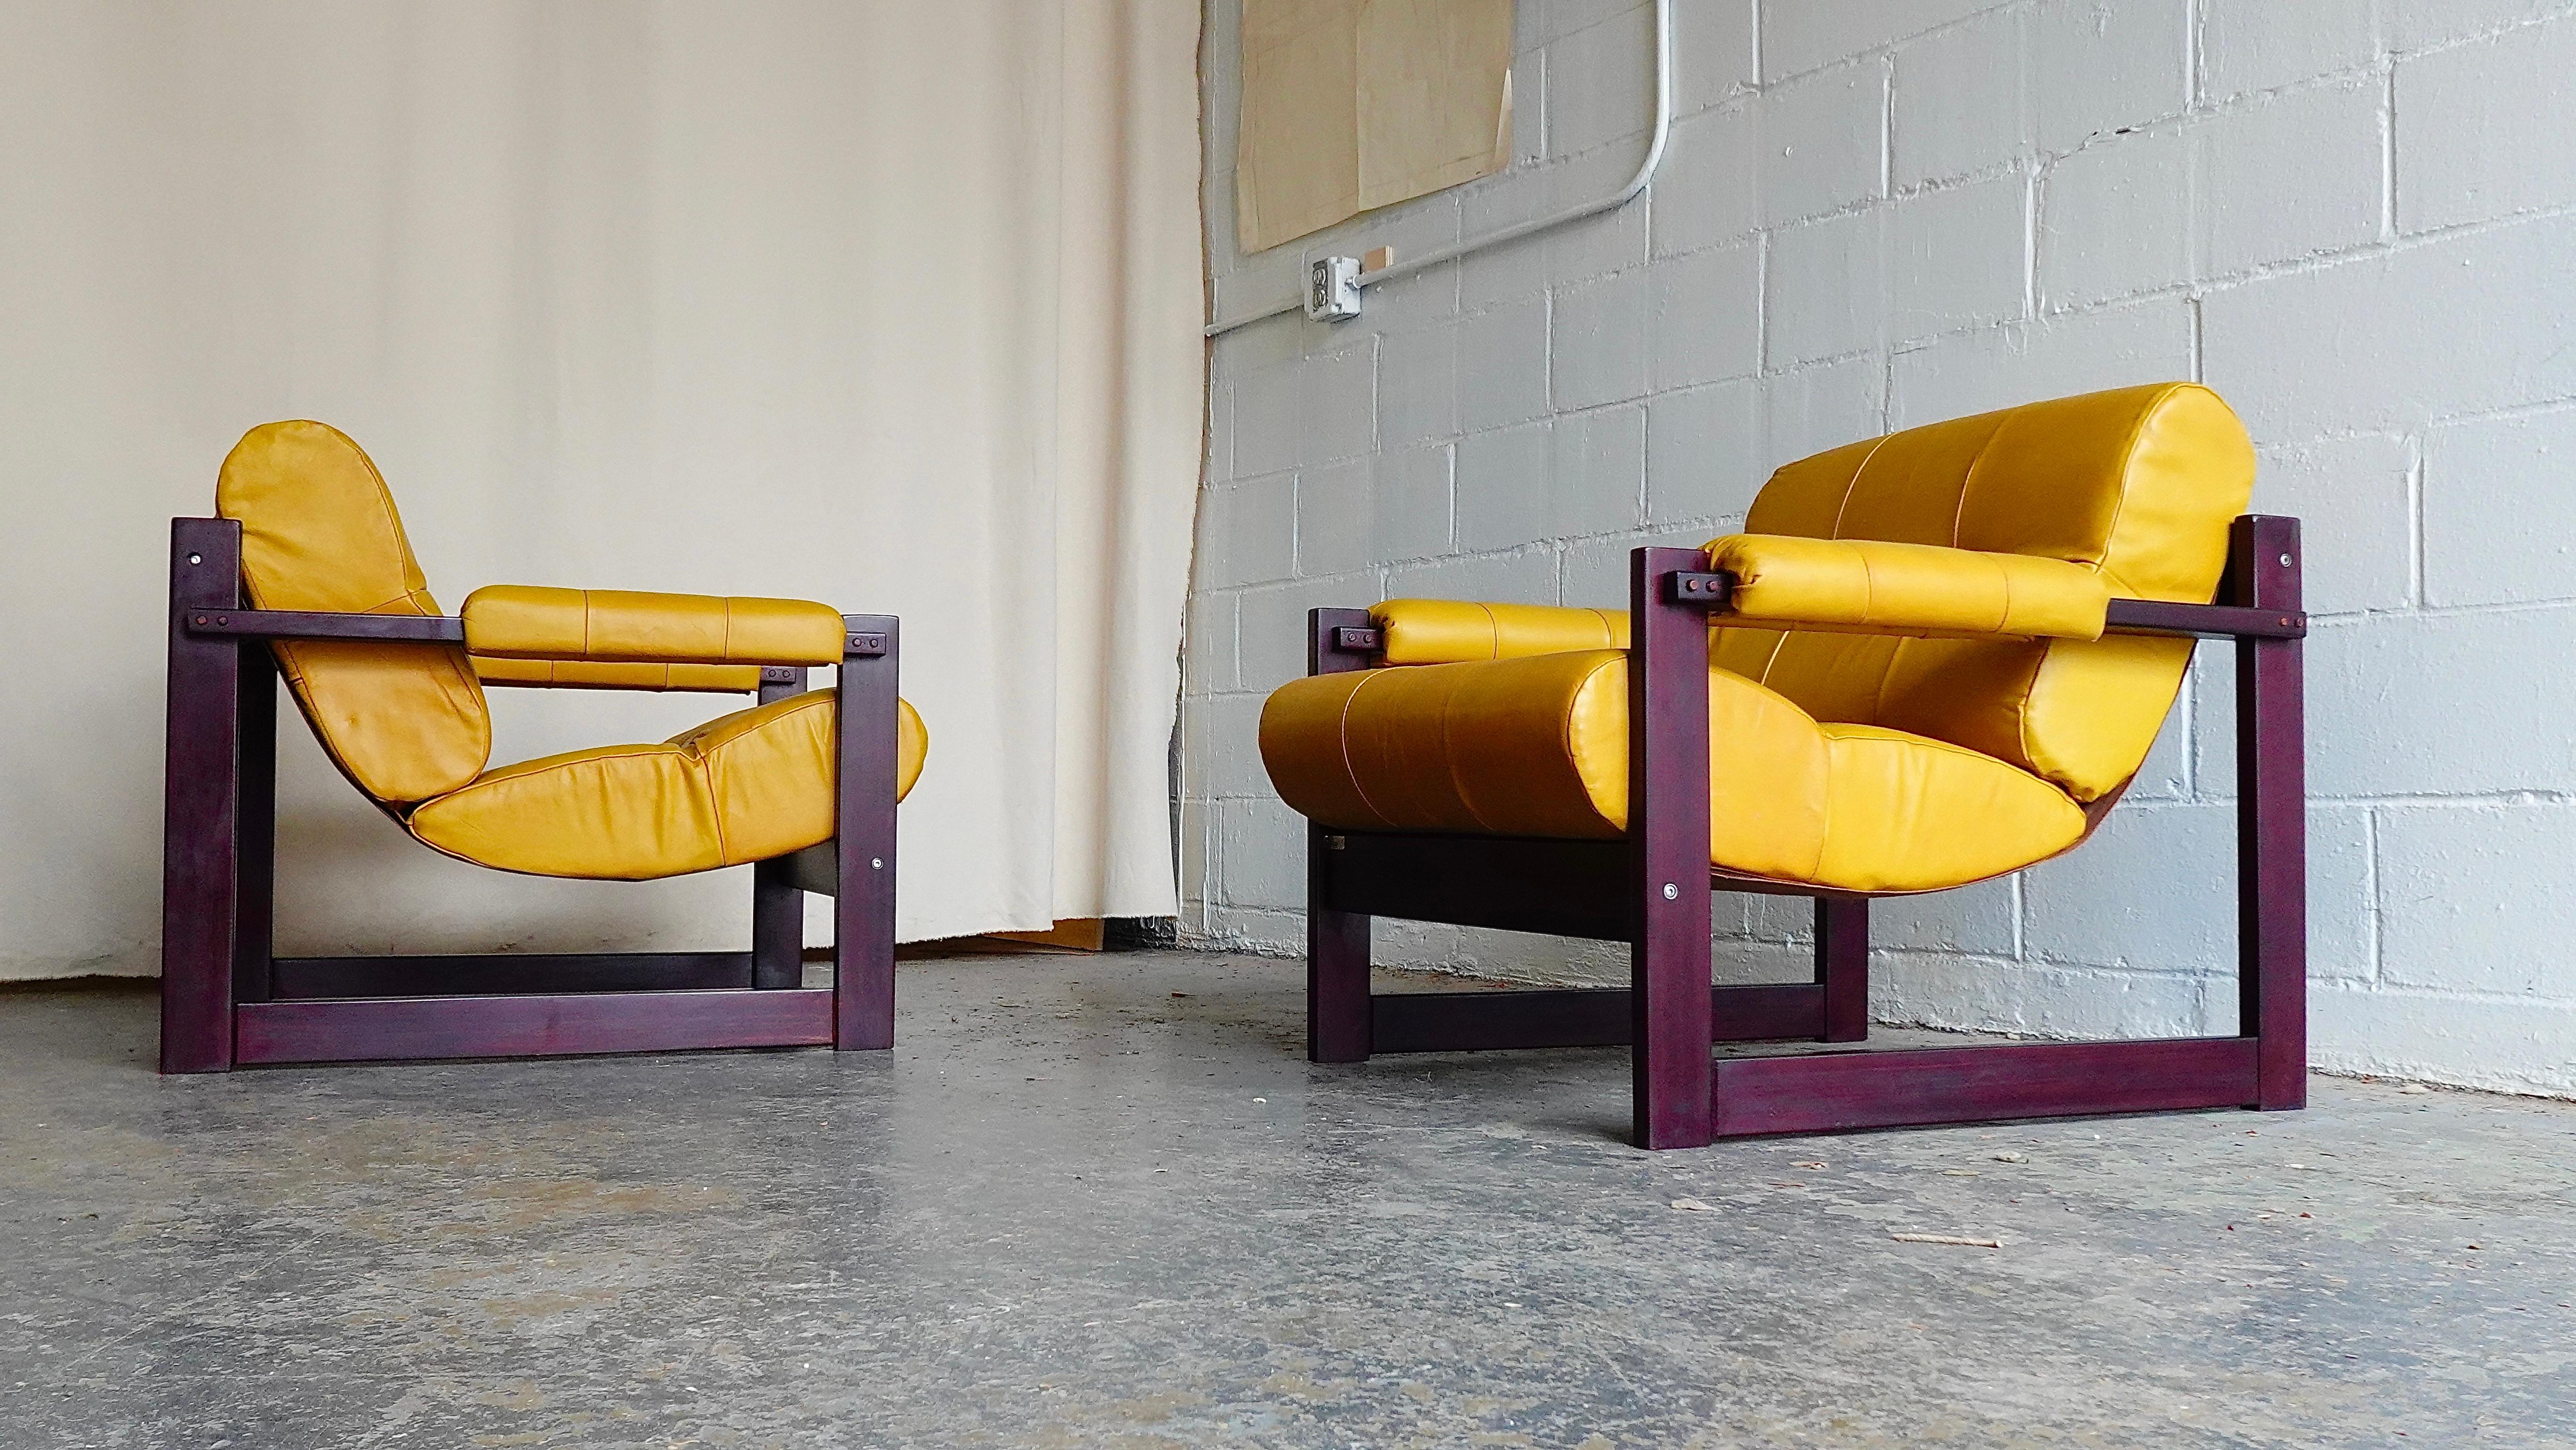 An attractive pair of Percival Lafer’s celebrated MP-167 lounge chairs in Jatoba wood and original yellow leather upholstery, marked with manufactures label and retailer’s mark. 

Rare to find such a well preserved all original example in this